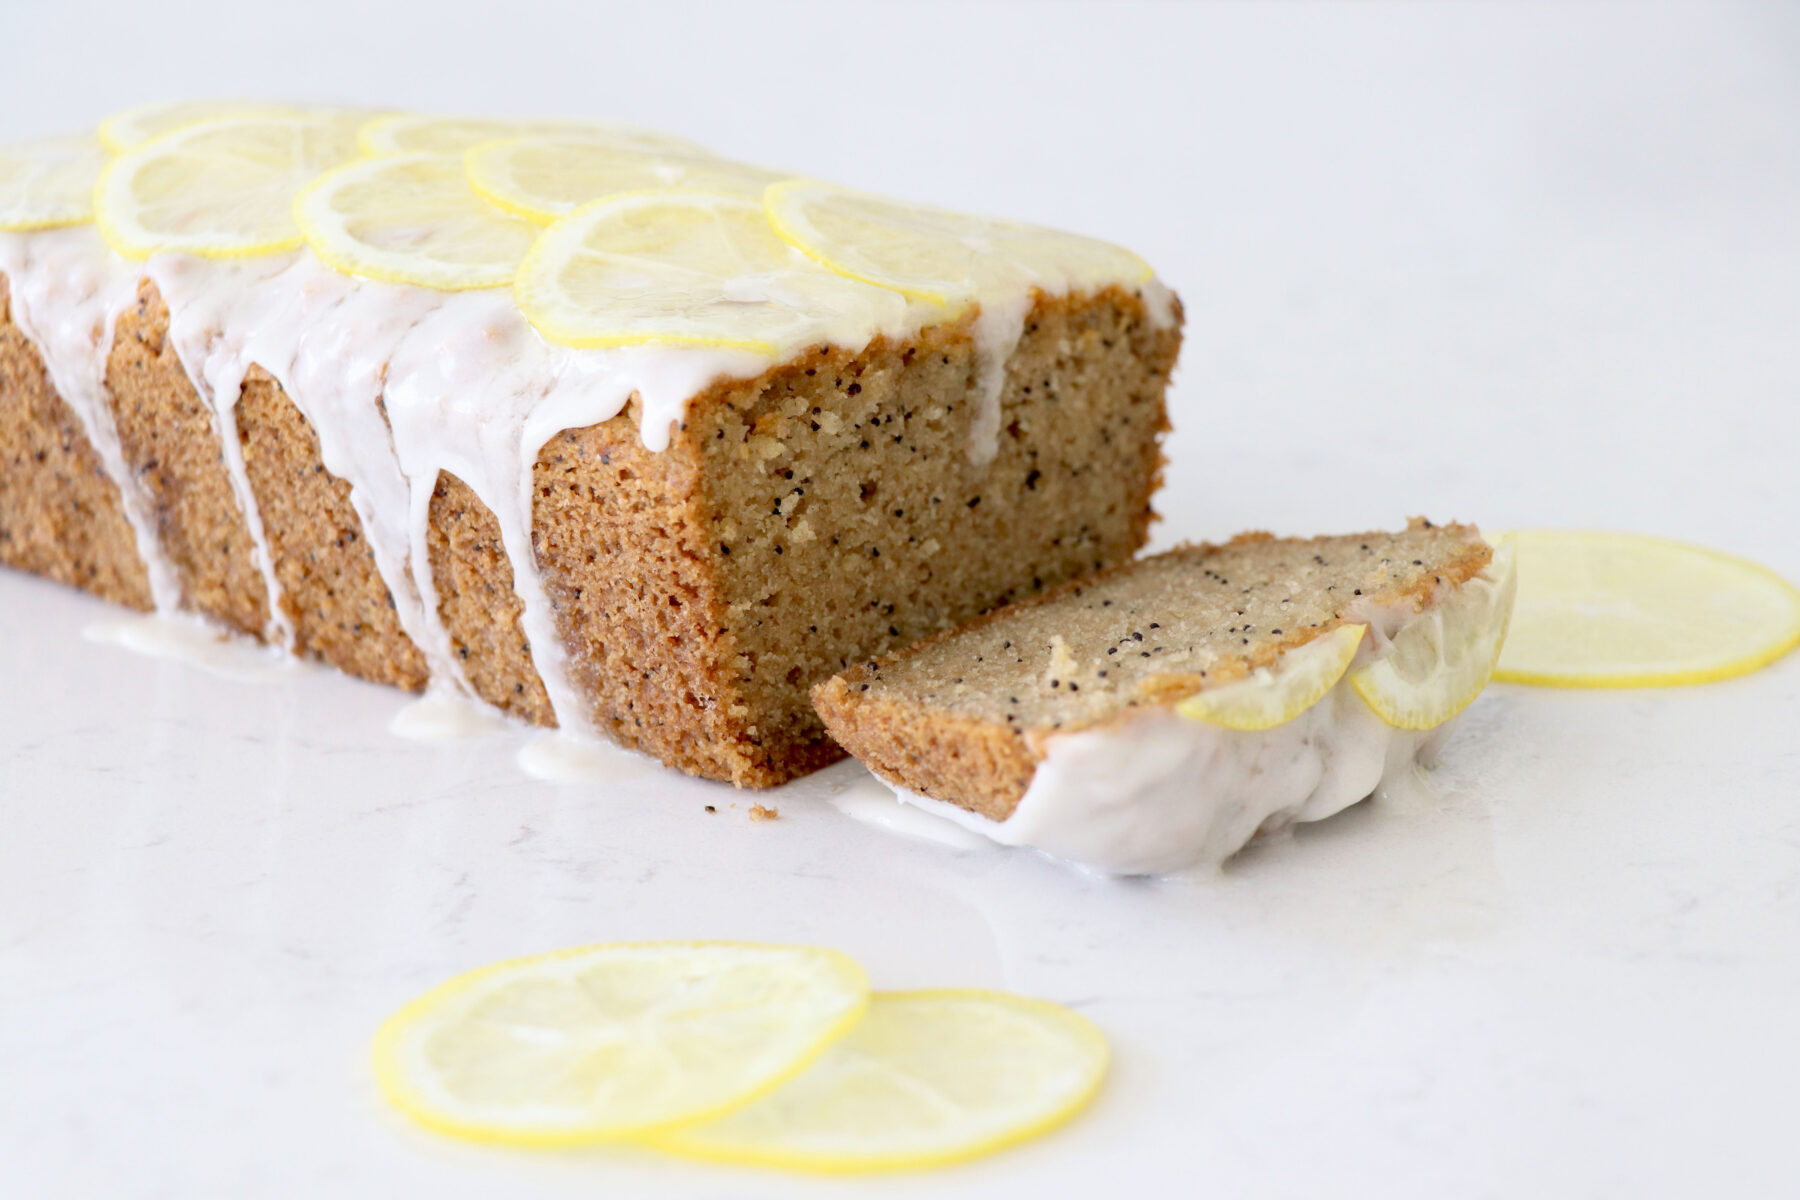 Poppy seed loaf with lemons on top.